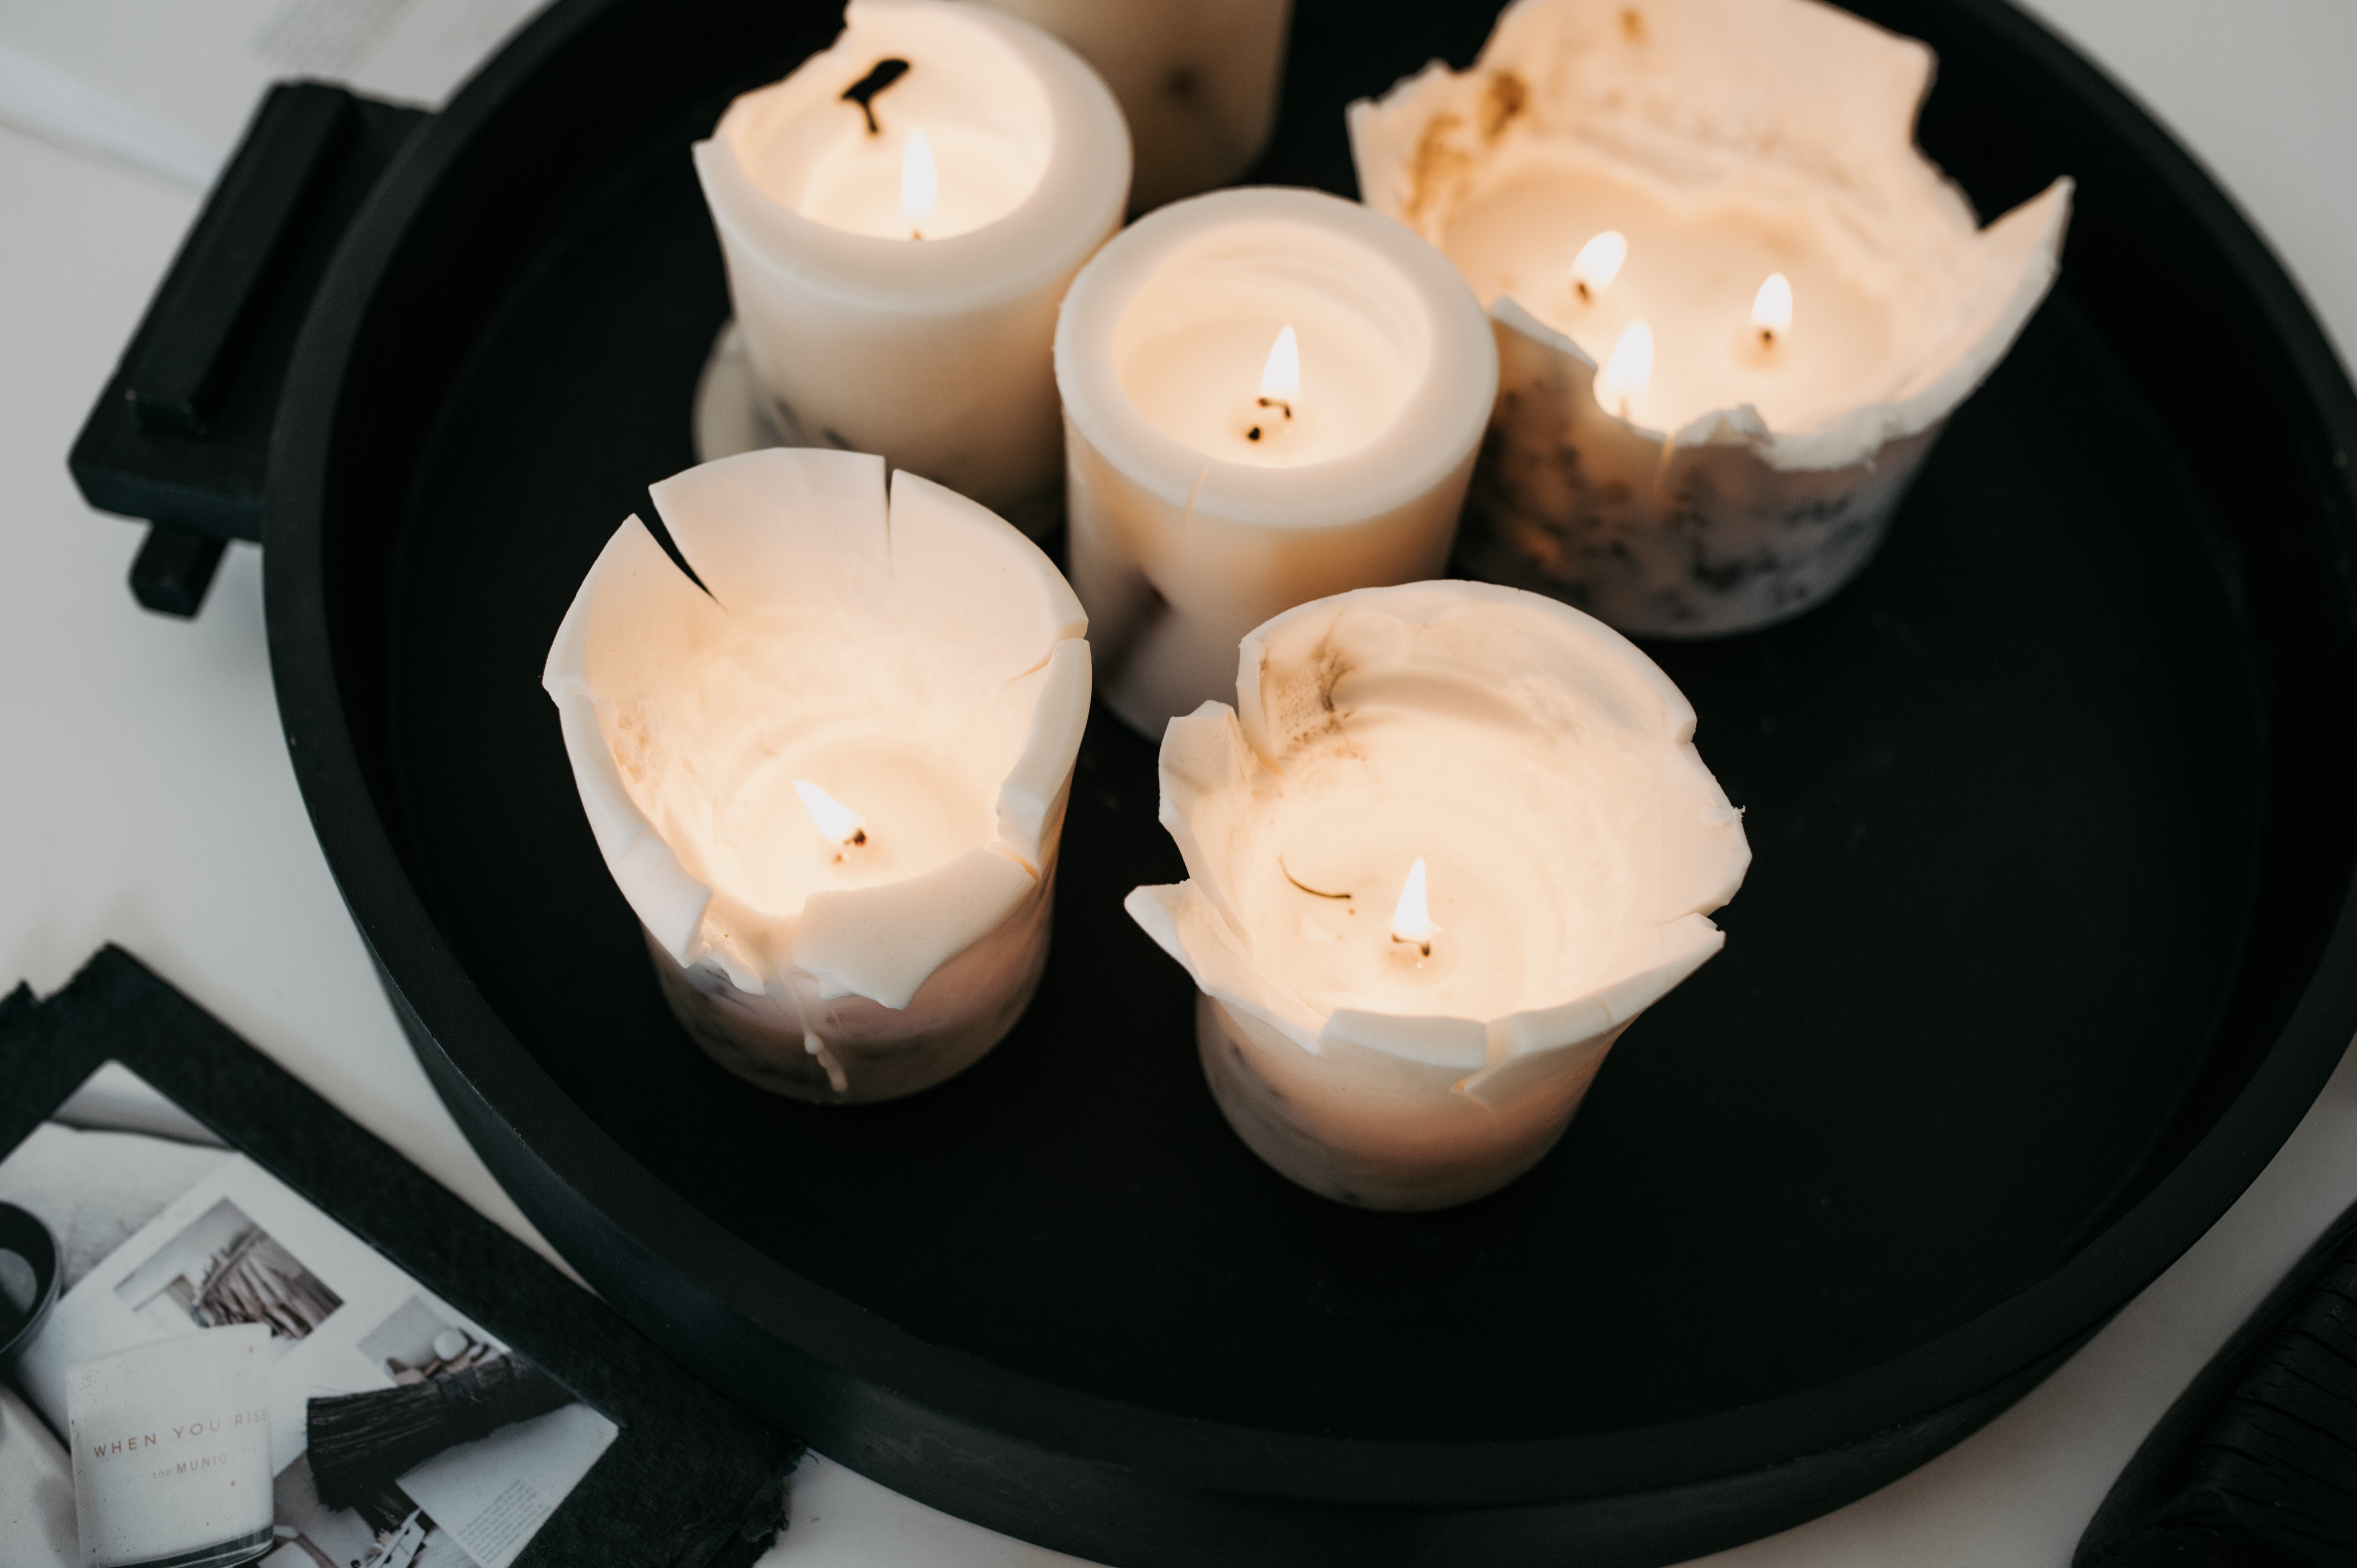 the MUNIO soy wax candles and organic skincare